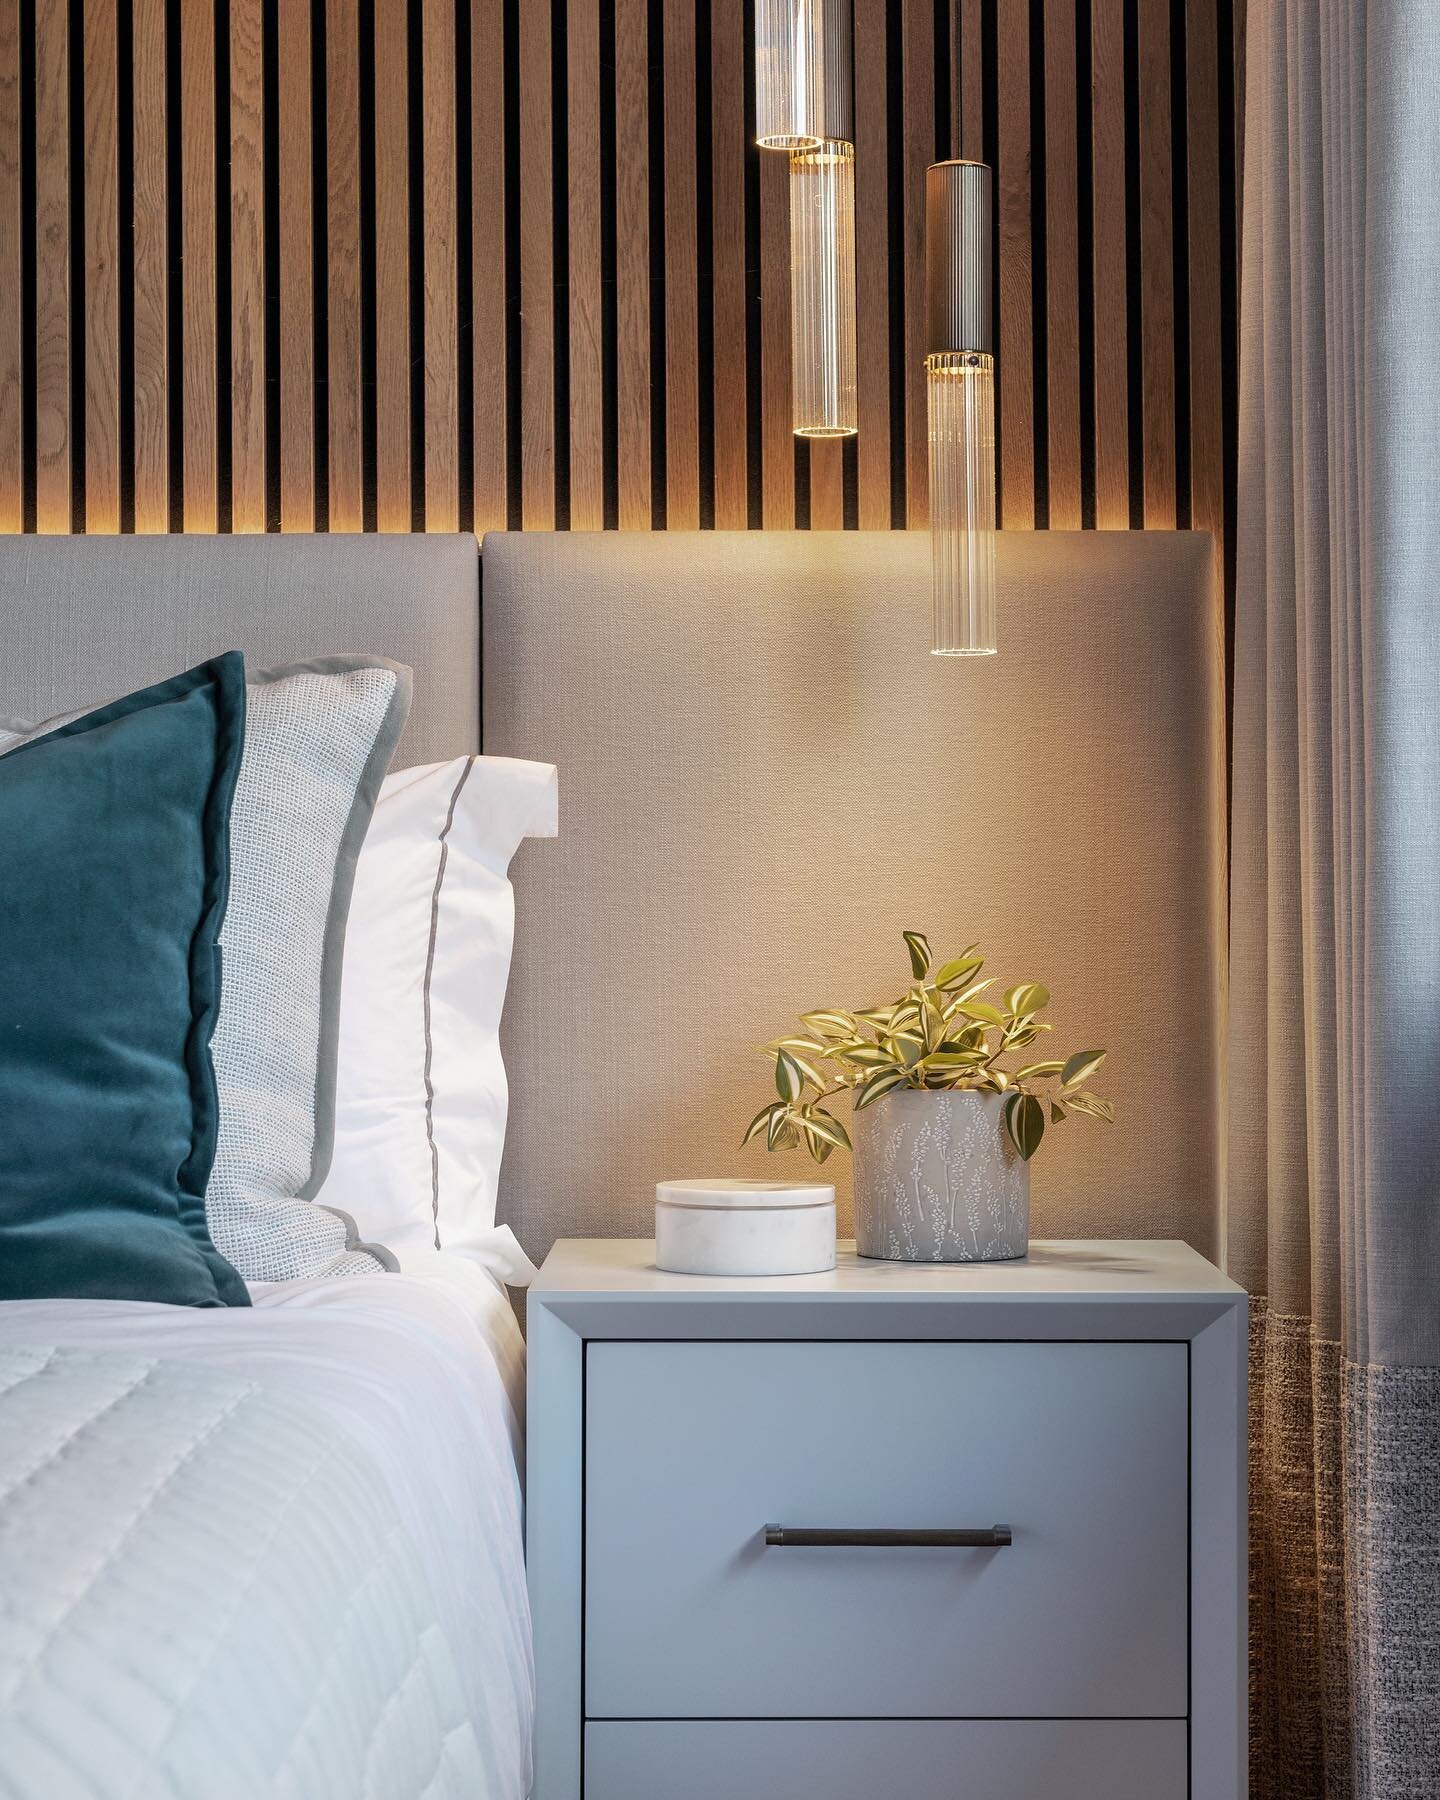 D U V E T  D A Y 

On grey, drizzly days like today, who else would love to enjoy a restful, cosy  duvet day here! 🌧️

We delivered a calming master bedroom scheme for our lovely client with an understated luxury style. The timber panel wall creates